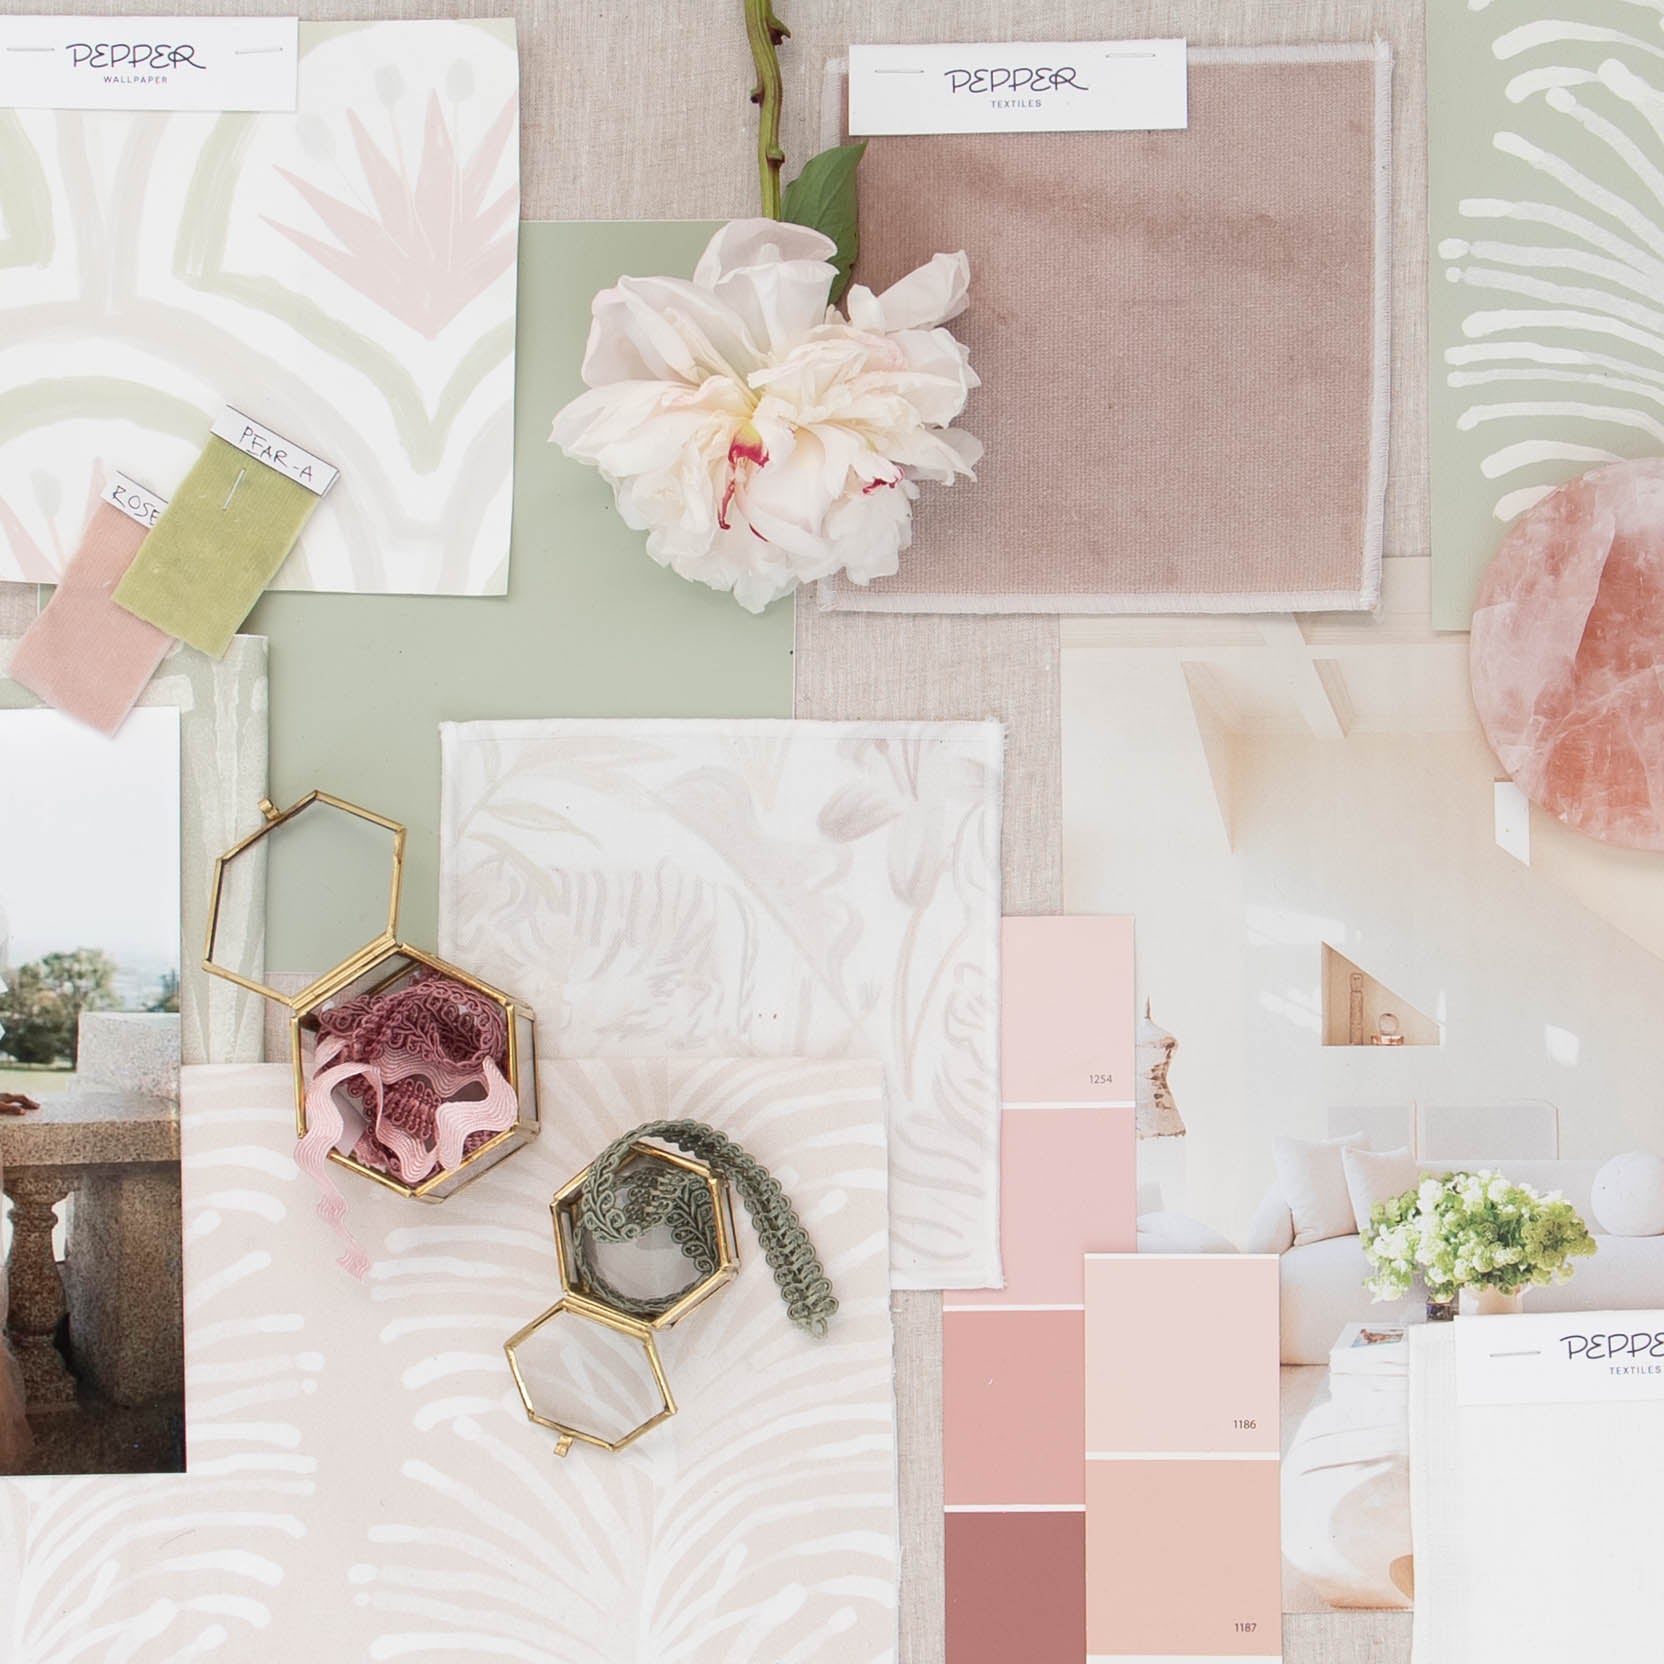 Interior design moodboard and fabric inspirations with Pink Art Deco Palm Printed Swatch, Pink Floral Printed Swatch, Pink Velvet Swatch, and Beige Chinoiserie Tiger Printed Swatch